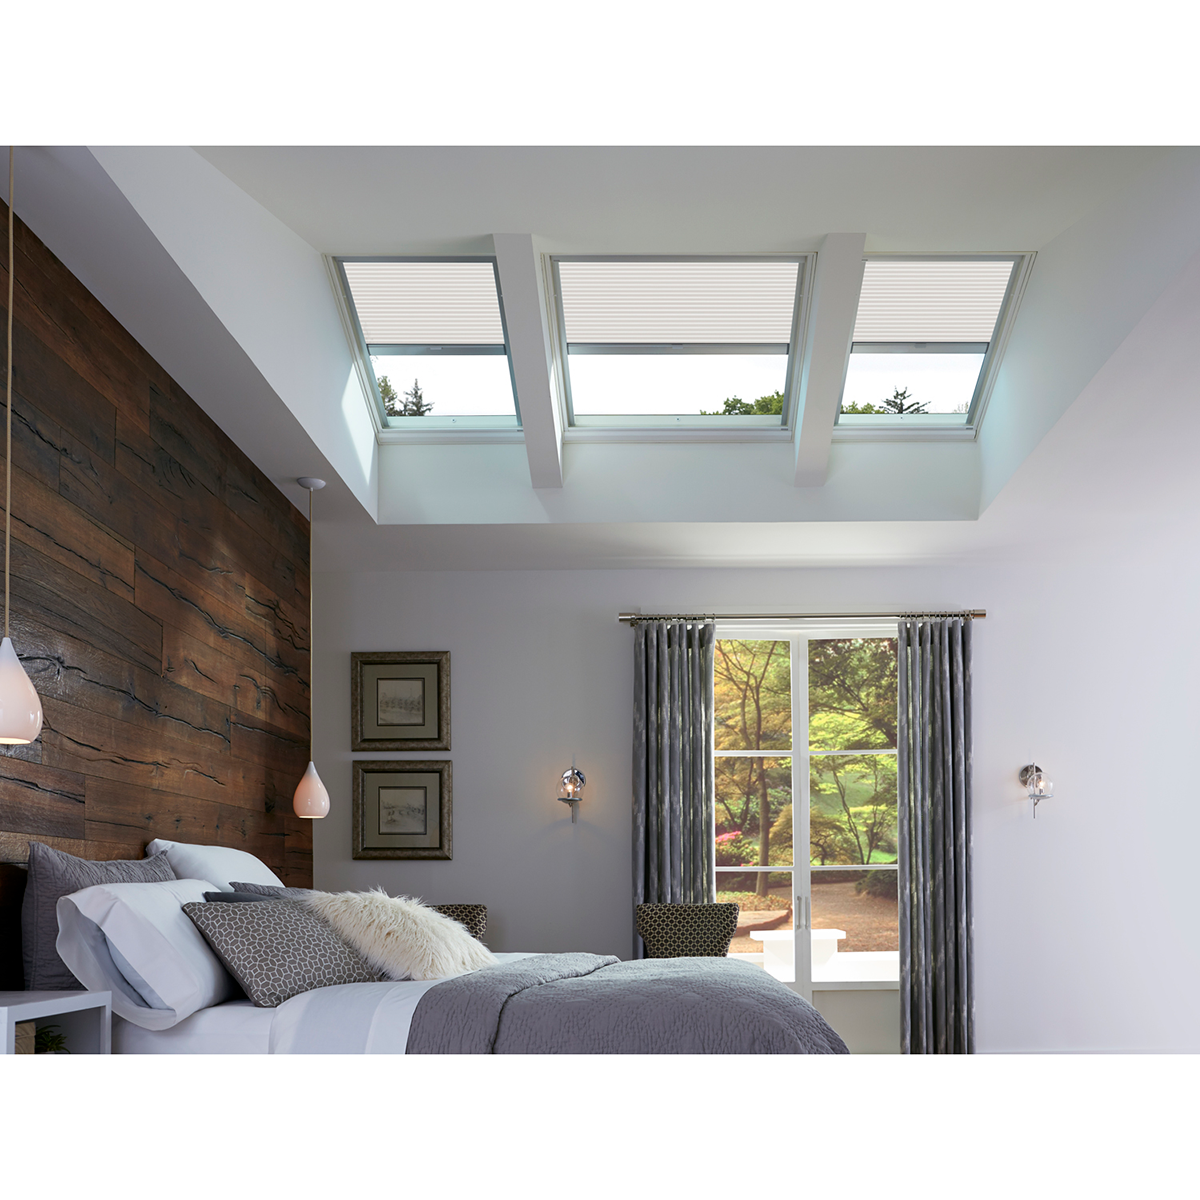 Fixed Self-Flashed Skylight with Laminated Low-E3 Glass - 30-1/2 in. x 46-1/2 in. - QPF 3046